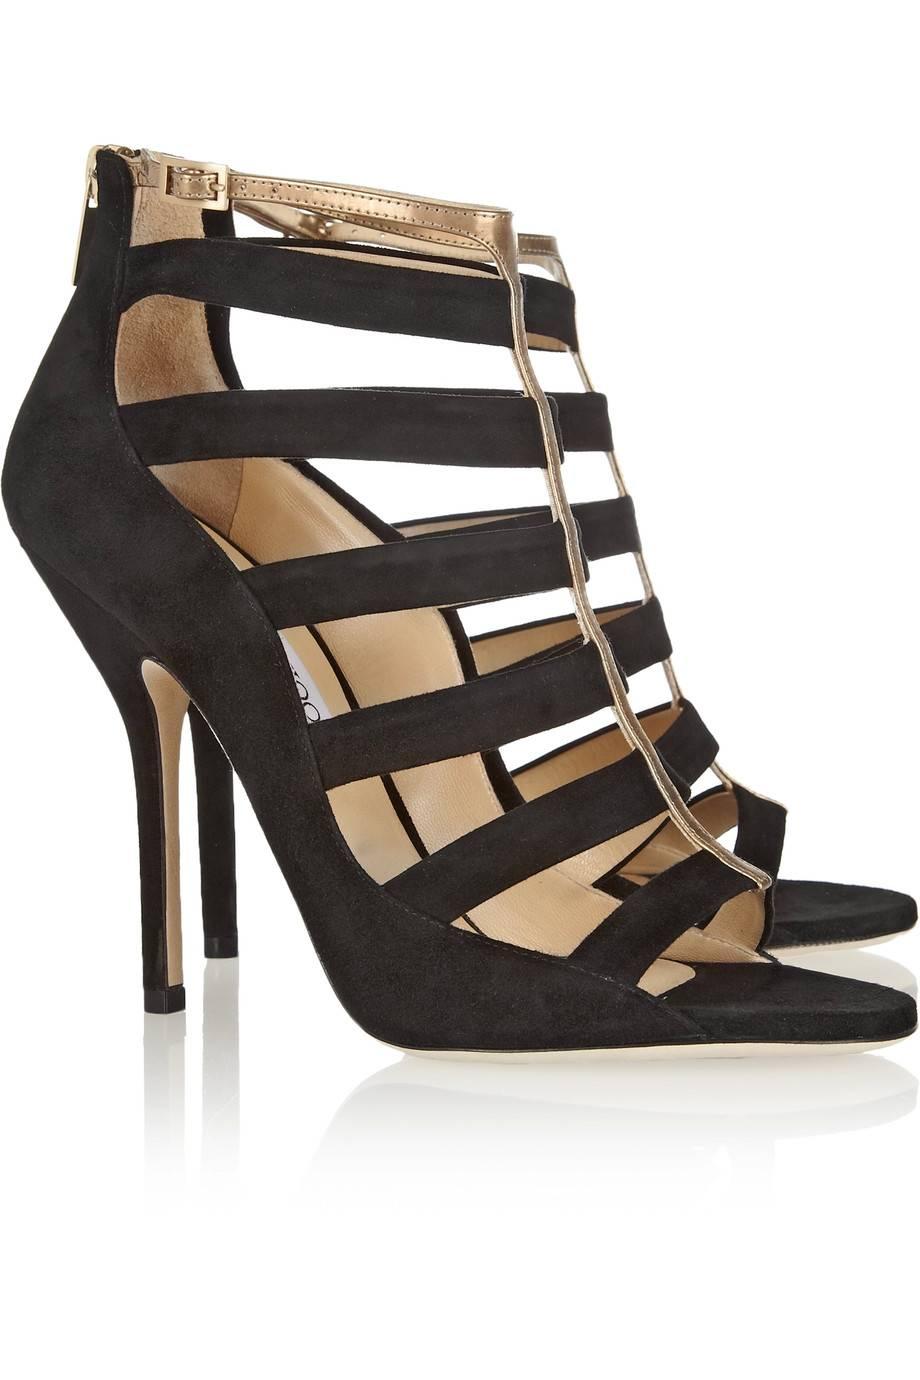 Jimmy Choo New Black Suede Gold Detail Cut Out Evening Heels Sandals in Box  In New Condition In Chicago, IL